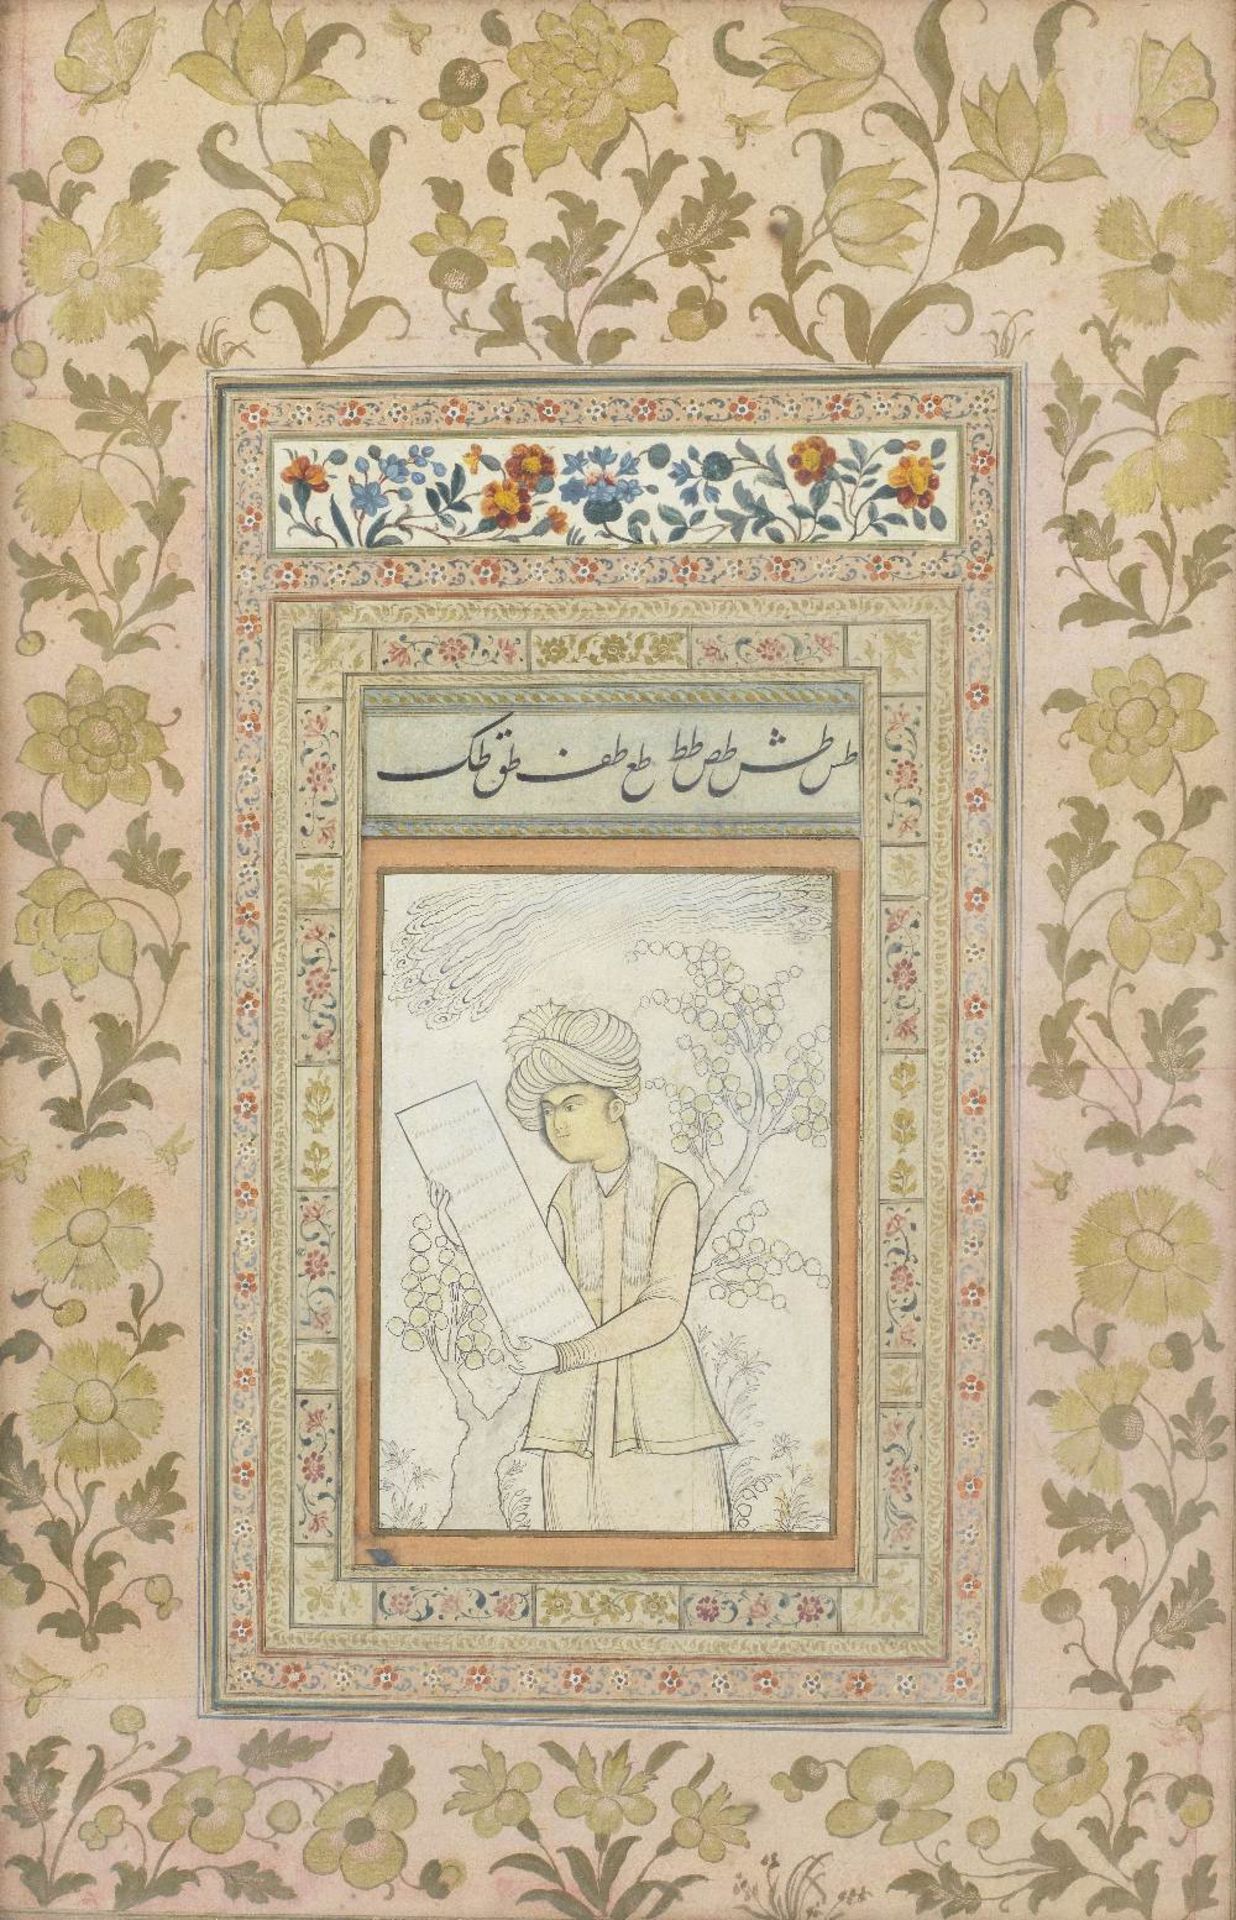 A youth reading a poem in a garden Qajar Persia, 19th Century